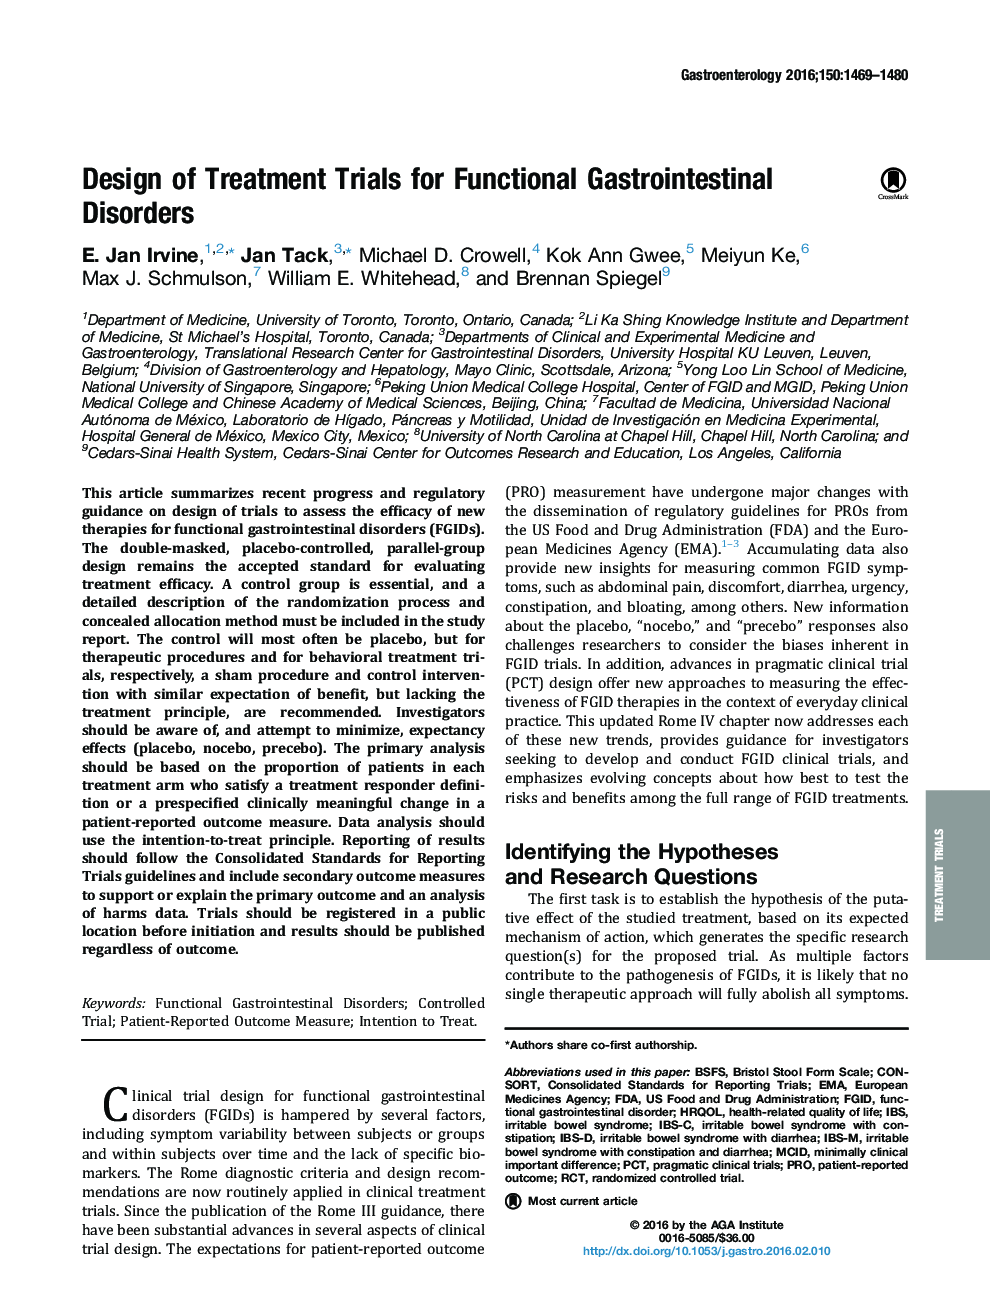 Design of Treatment Trials for Functional Gastrointestinal Disorders